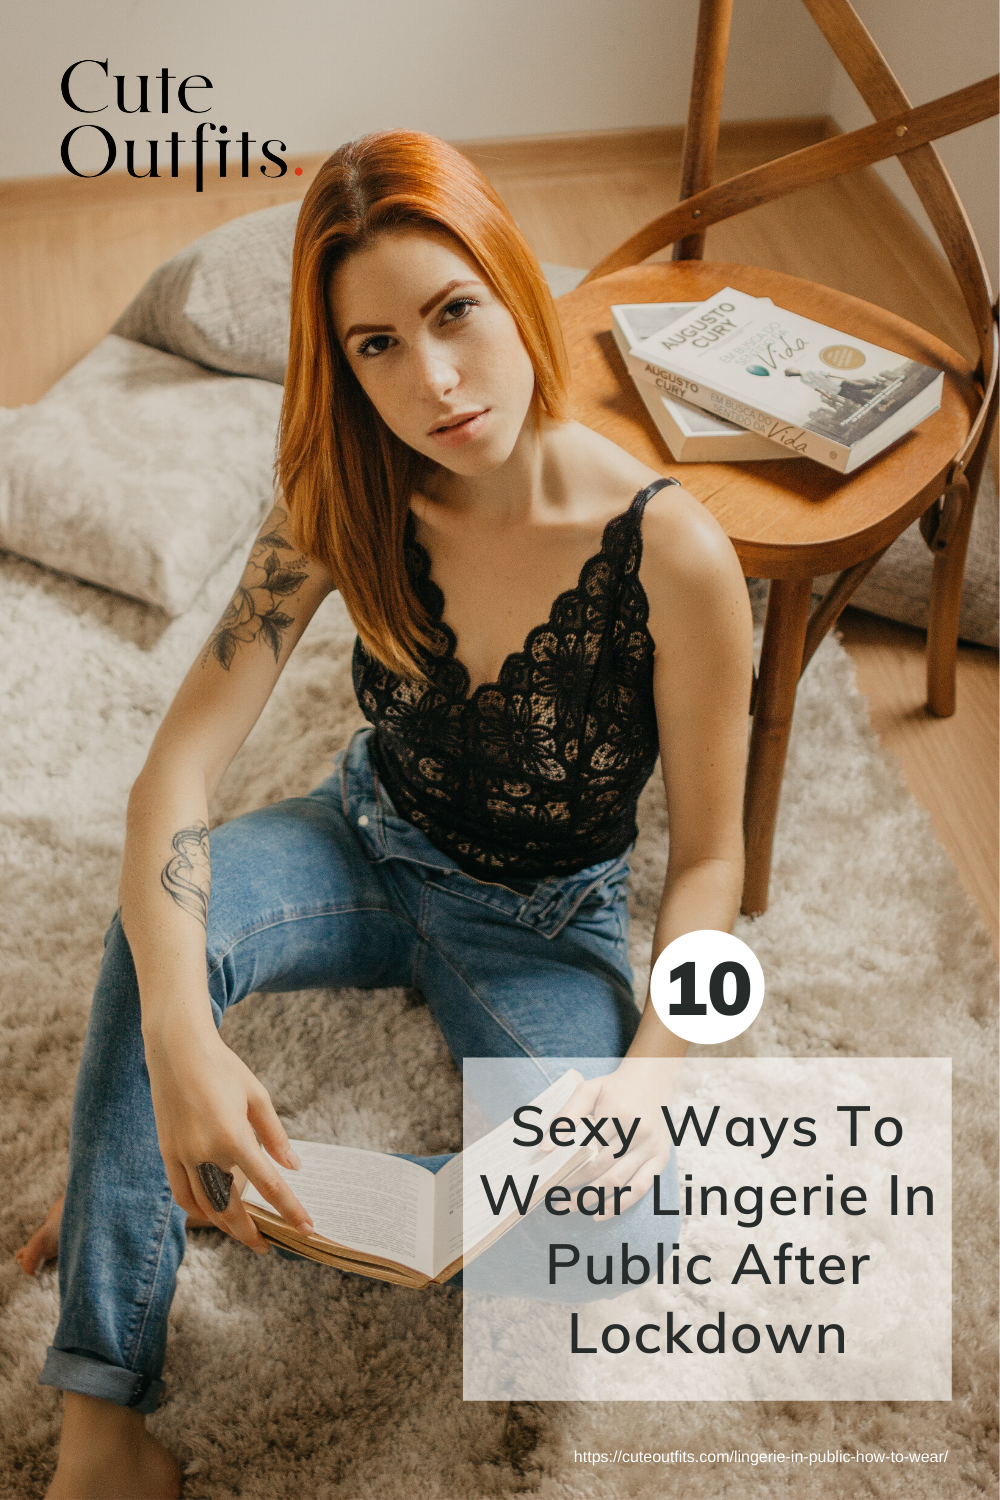 Placard | 10 Sexy Ways To Wear Lingerie In Public After Lockdown